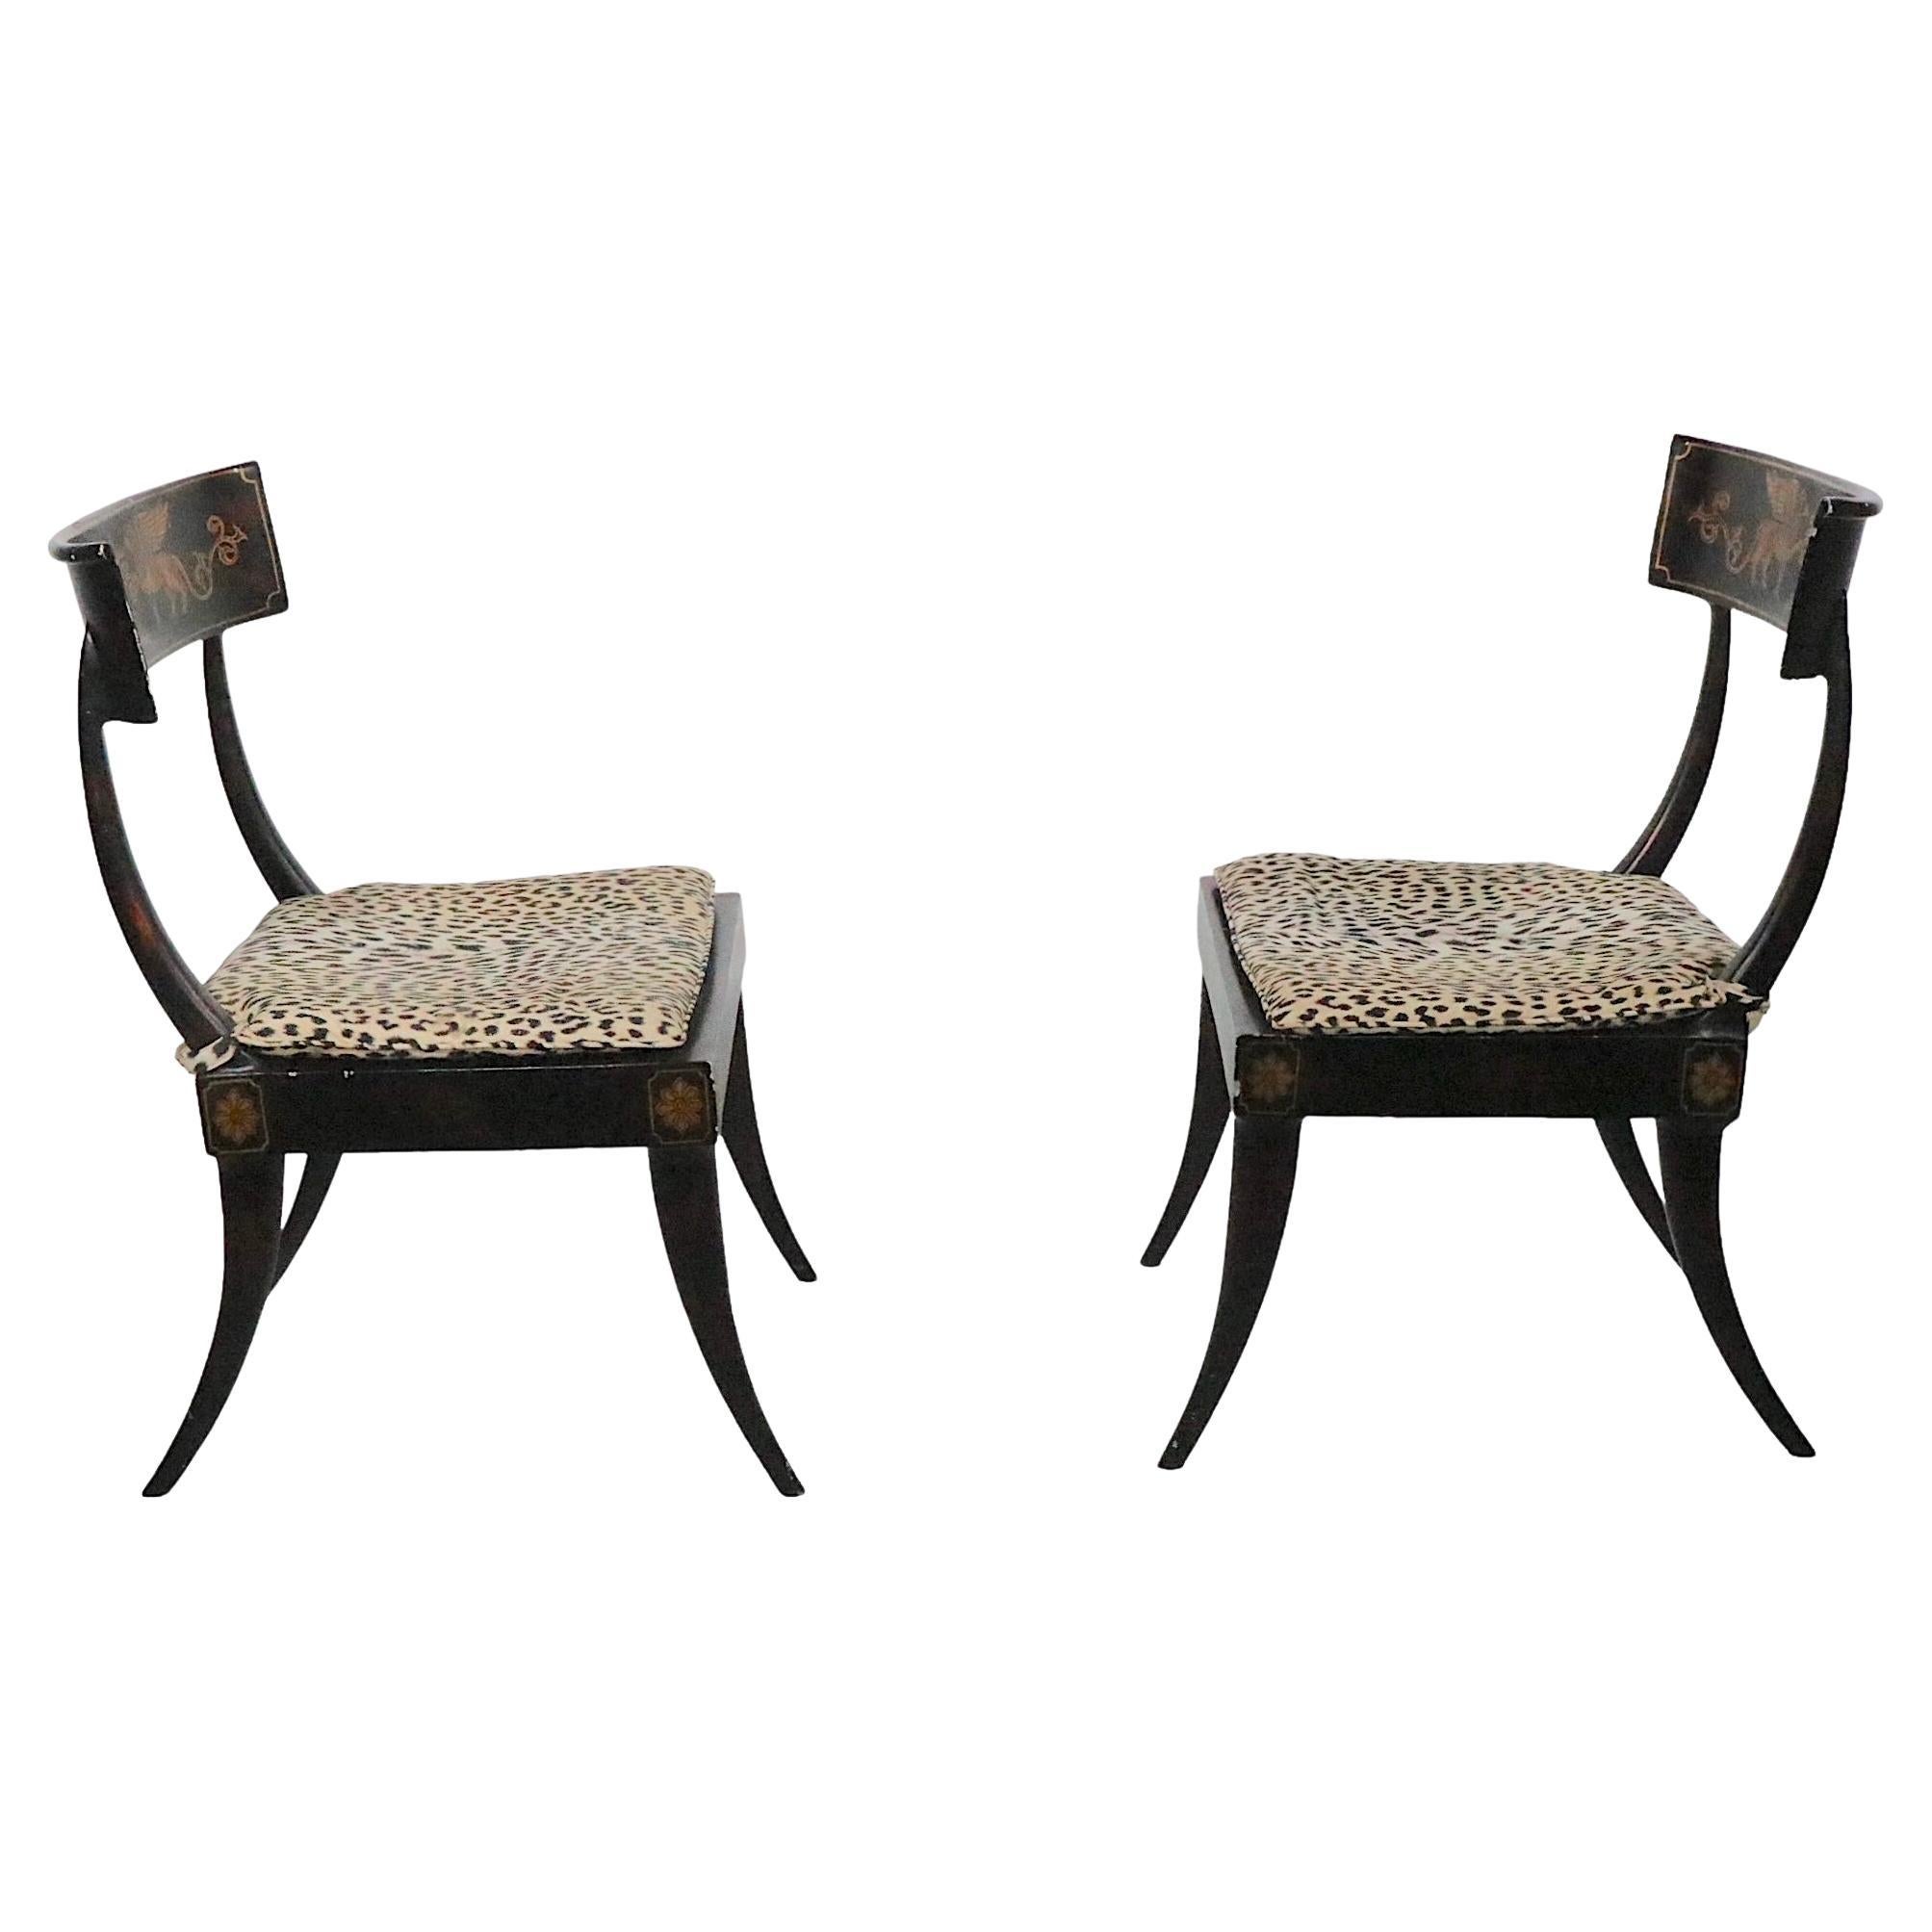 Exceptional pair of Italian neoclassical side, or dining chairs, constructed of metal with faux gilt decoration, and chic leopard print seat cushions. The chairs are in very good, original condition, showing minor loss to pint finish, normal and